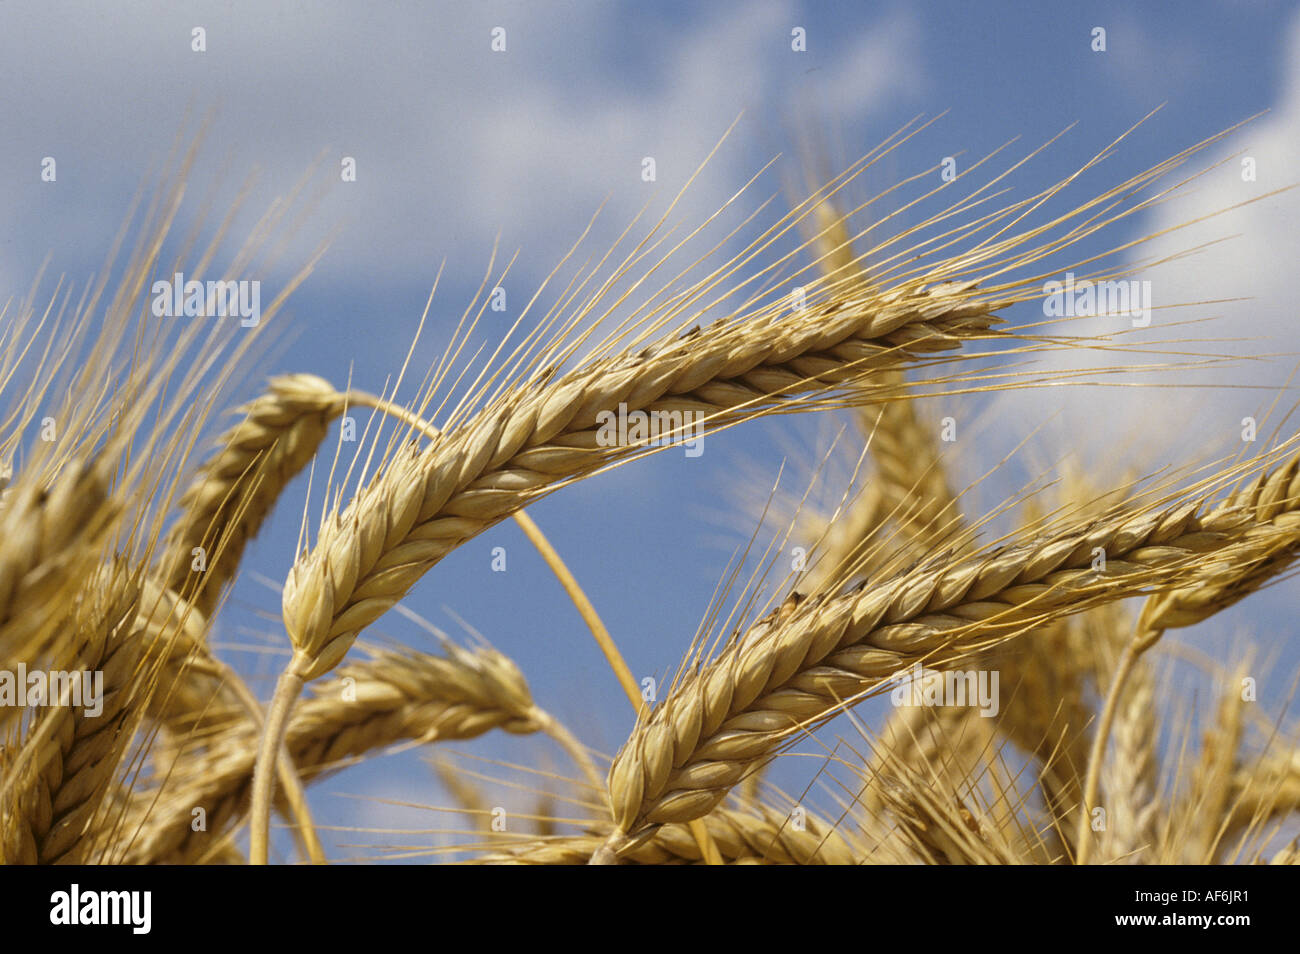 Ripe ear of triticale variety Salvo against blue sky clouds Stock Photo